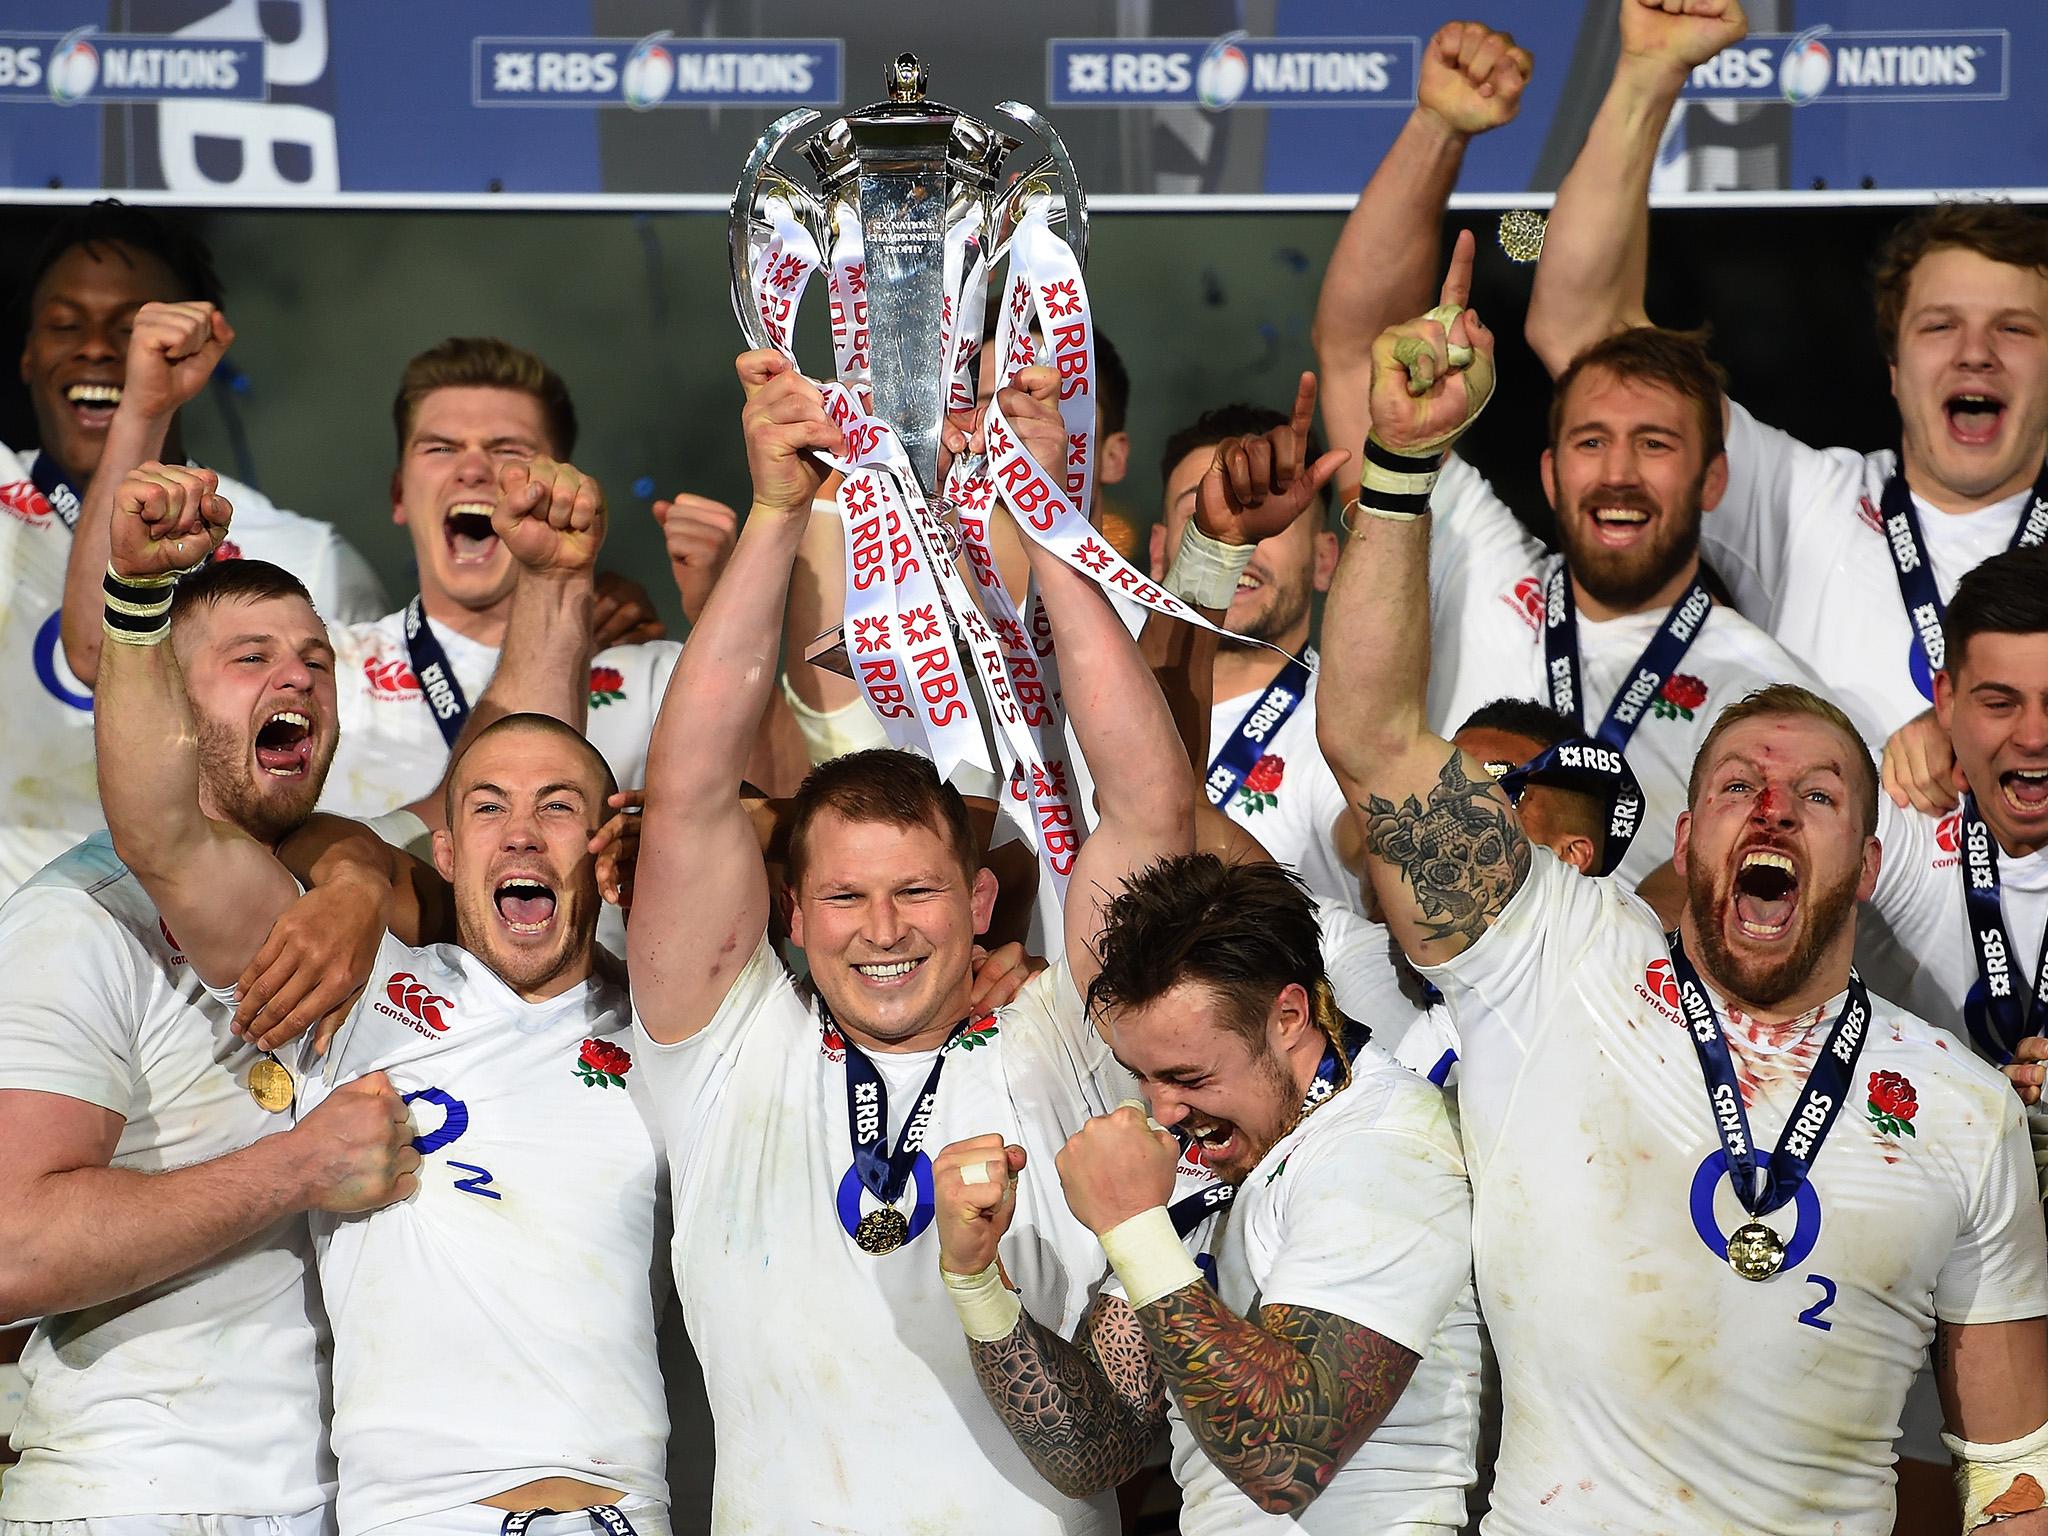 England are the reigning Six Nations champions having won every game in 2016